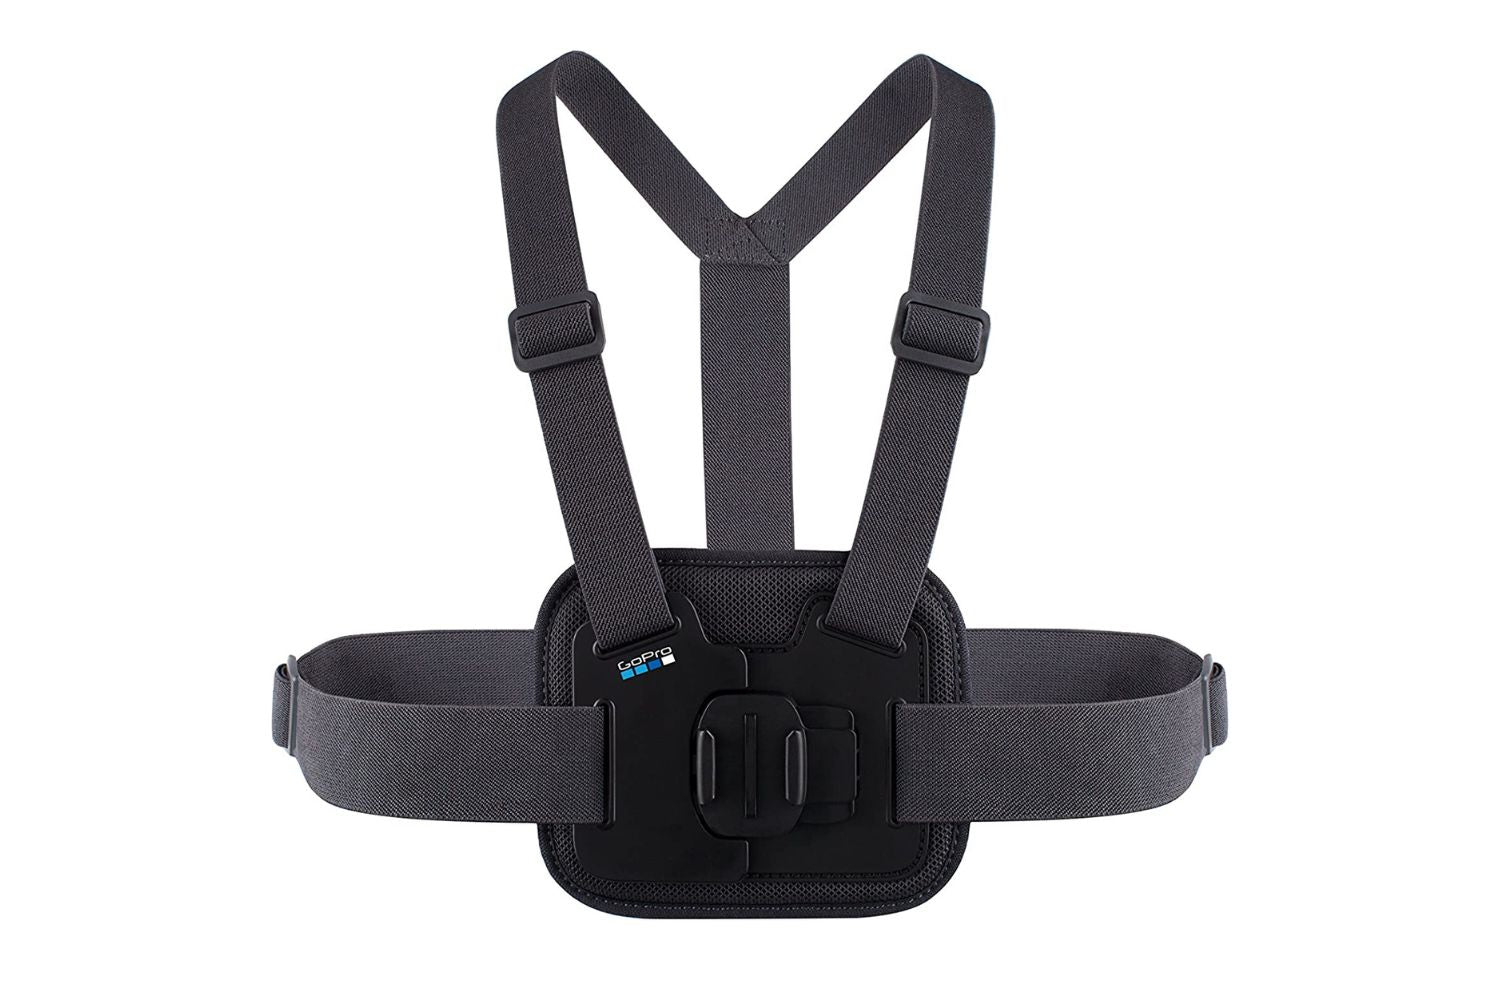 GoPro Performance Chest Mount